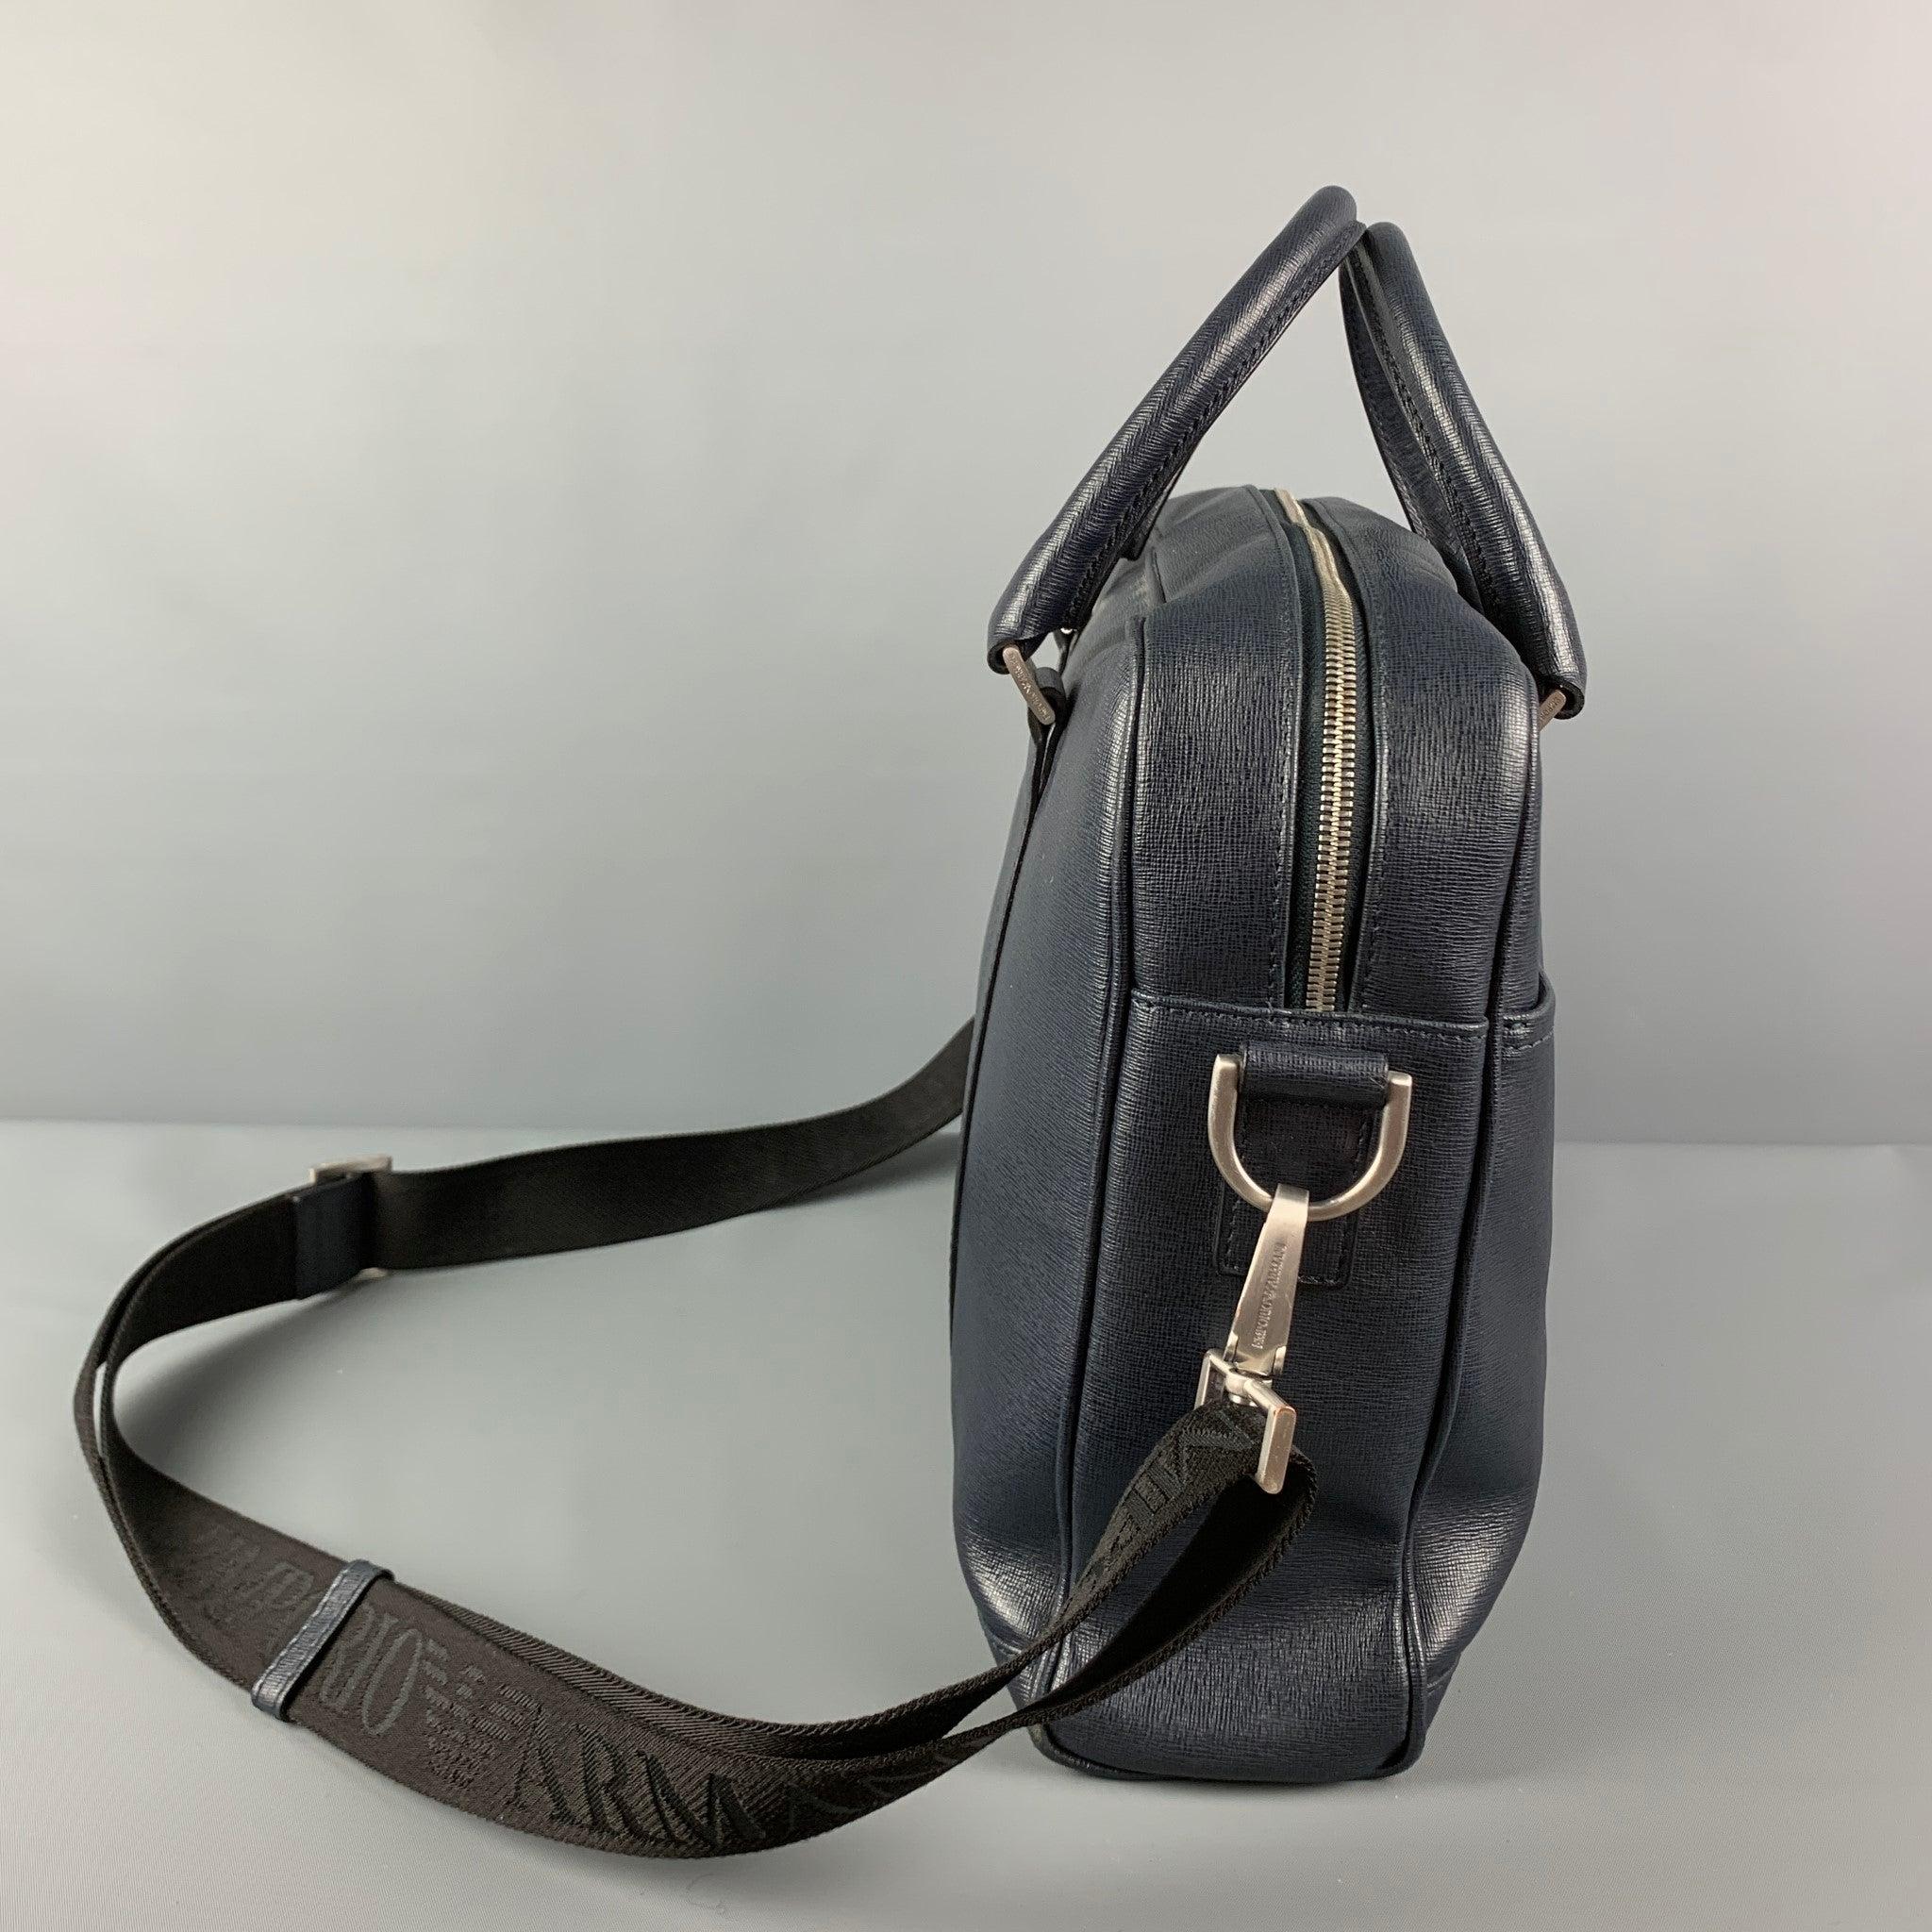 EMPORIO ARMANI bag comes in a navy textures saffiano leather featuring a briefcase style, detachable crossbody strap, top handles, silver tone hardware, front pockets, interior pocket, and a zipper closure. Made in Italy.
Very Good
Pre-Owned